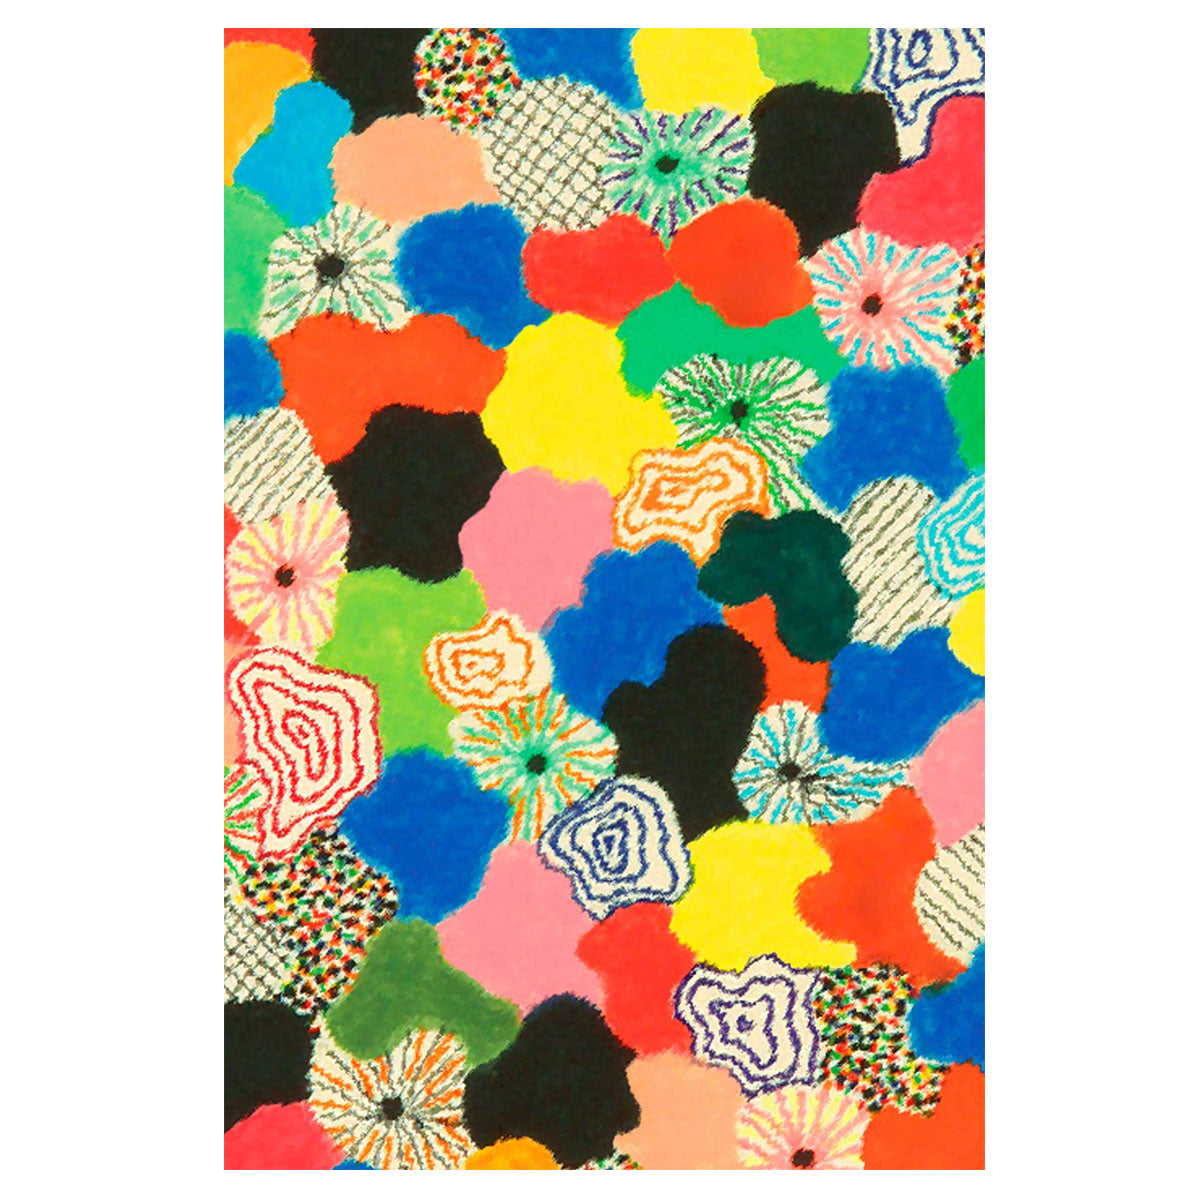 Patch Carpet by Alessandro Mendini